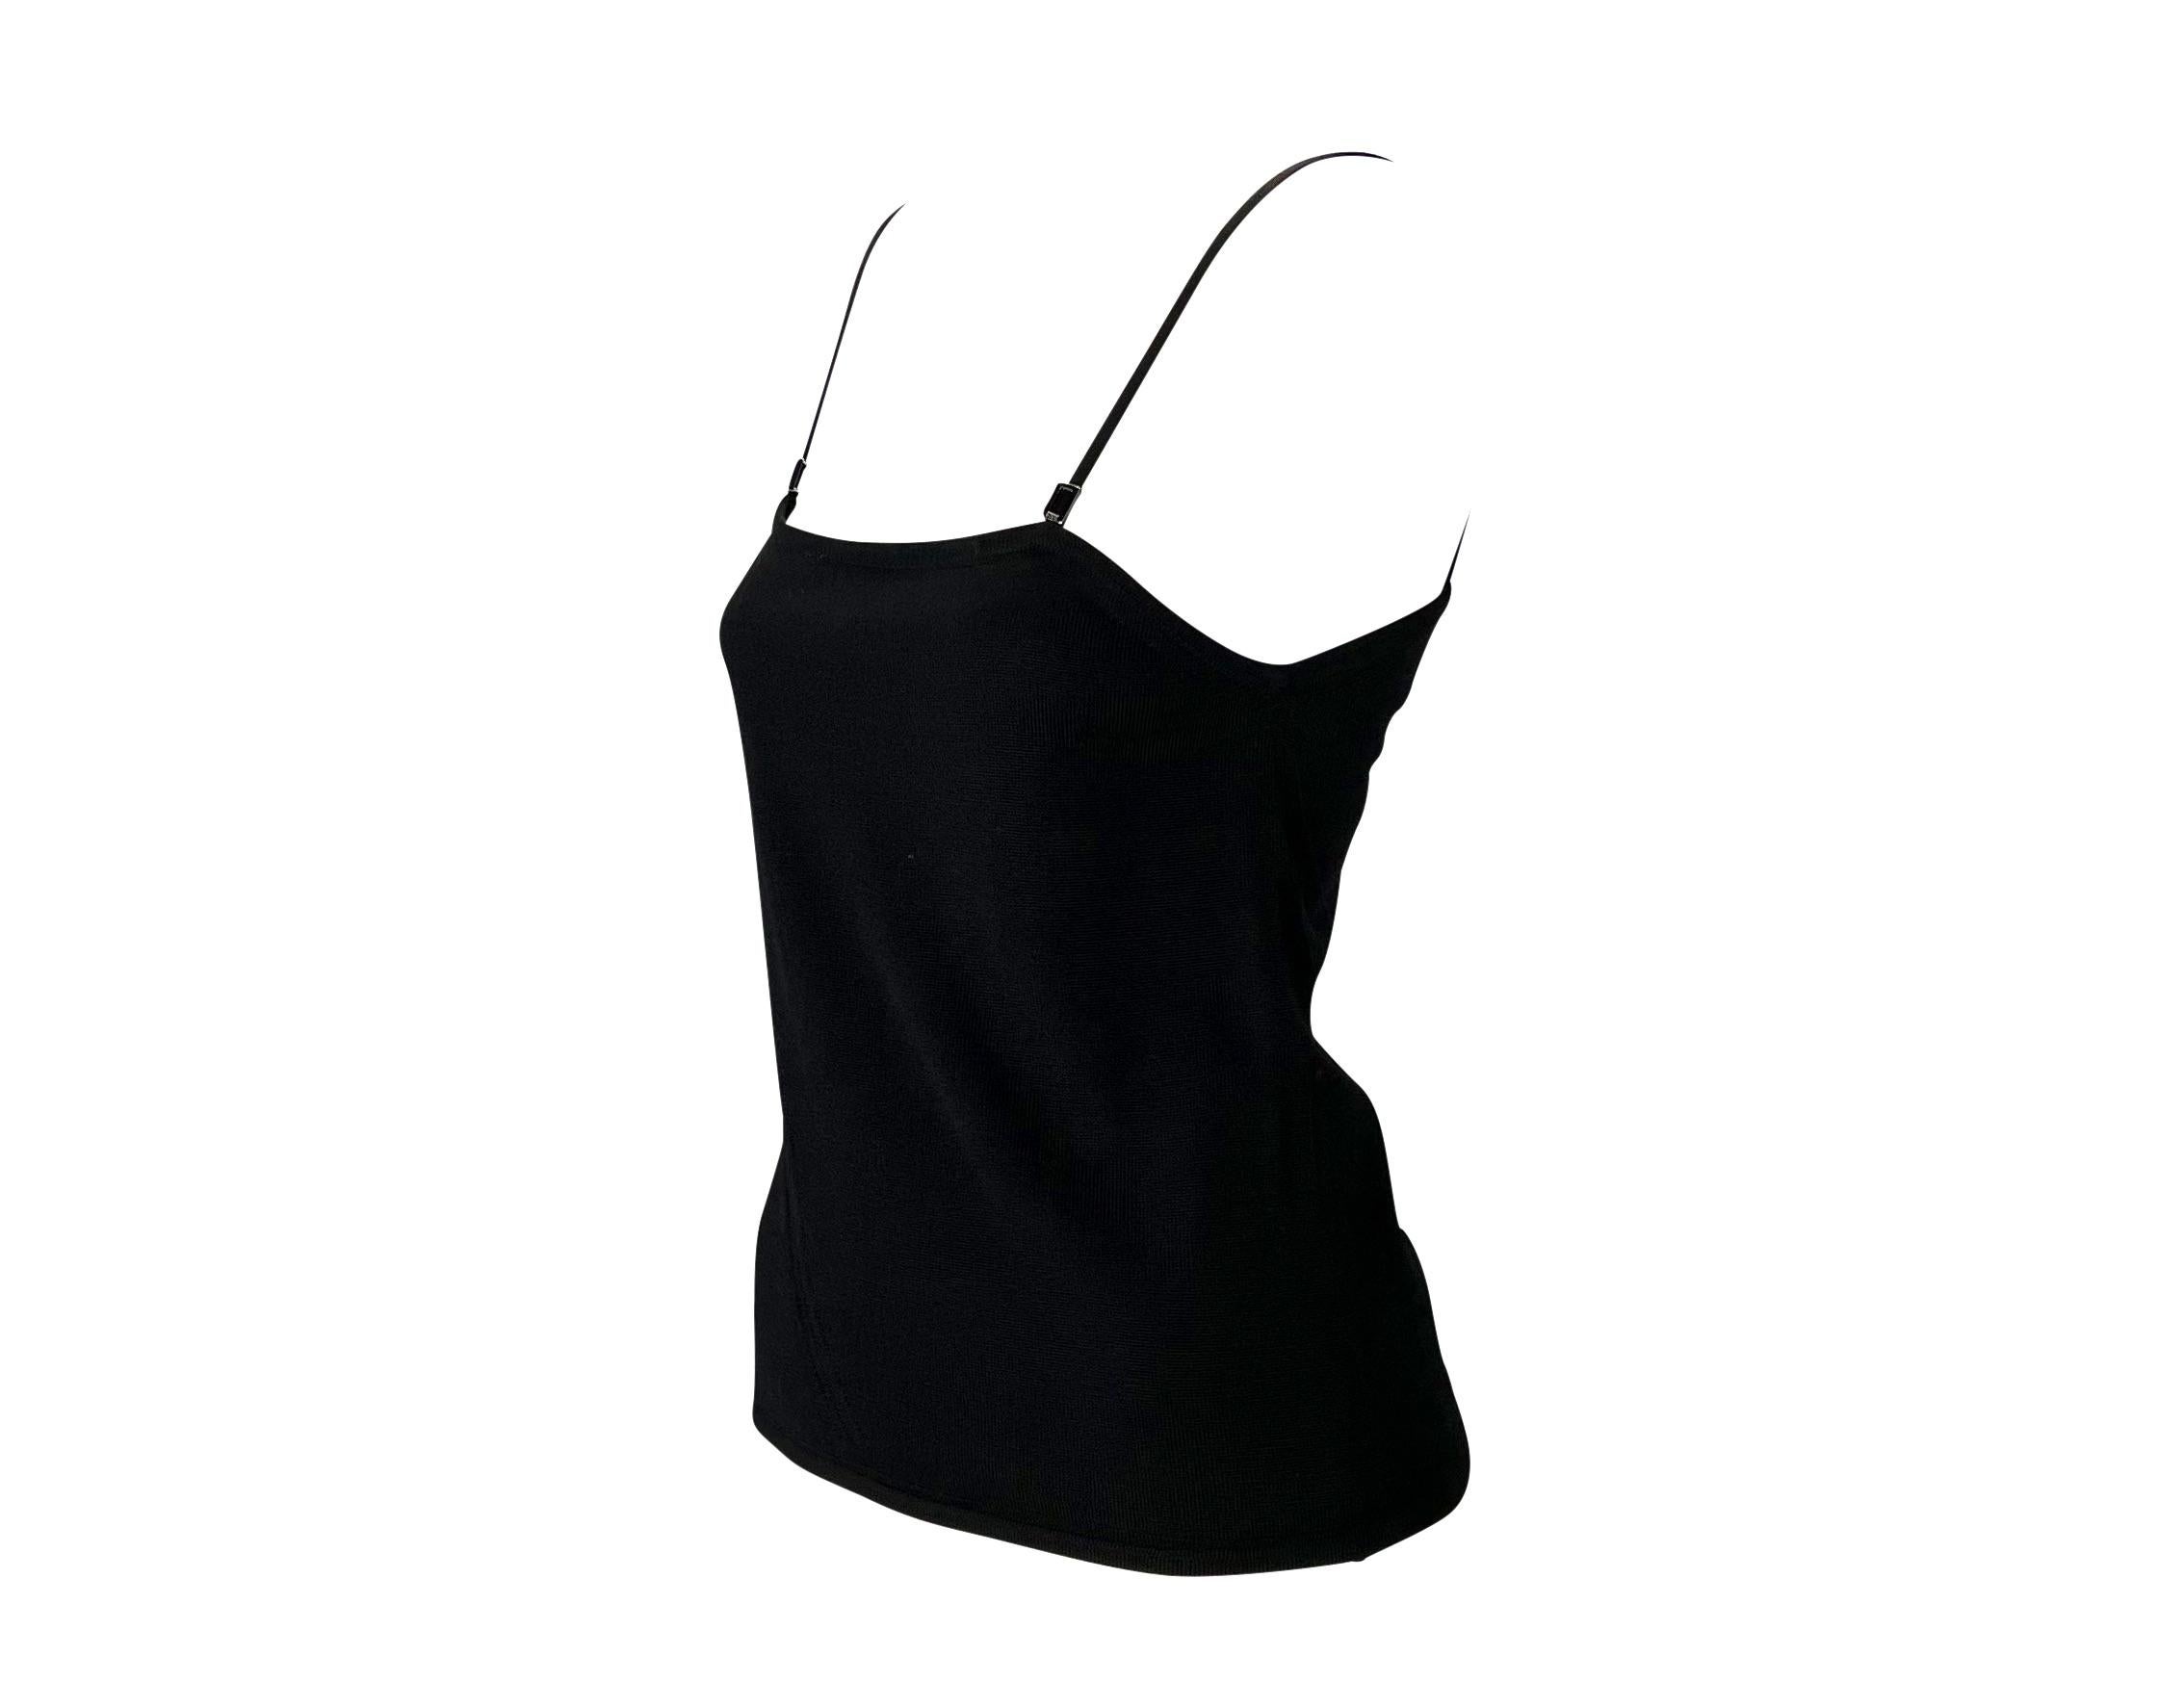 Presenting a black wool spaghetti strap Gucci tank top, designed by Tom Ford. From the Fall/Winter 1998 collection, this stunning tank top features a square neckline and moveable metal branded charms attached to the straps. Not your average tank